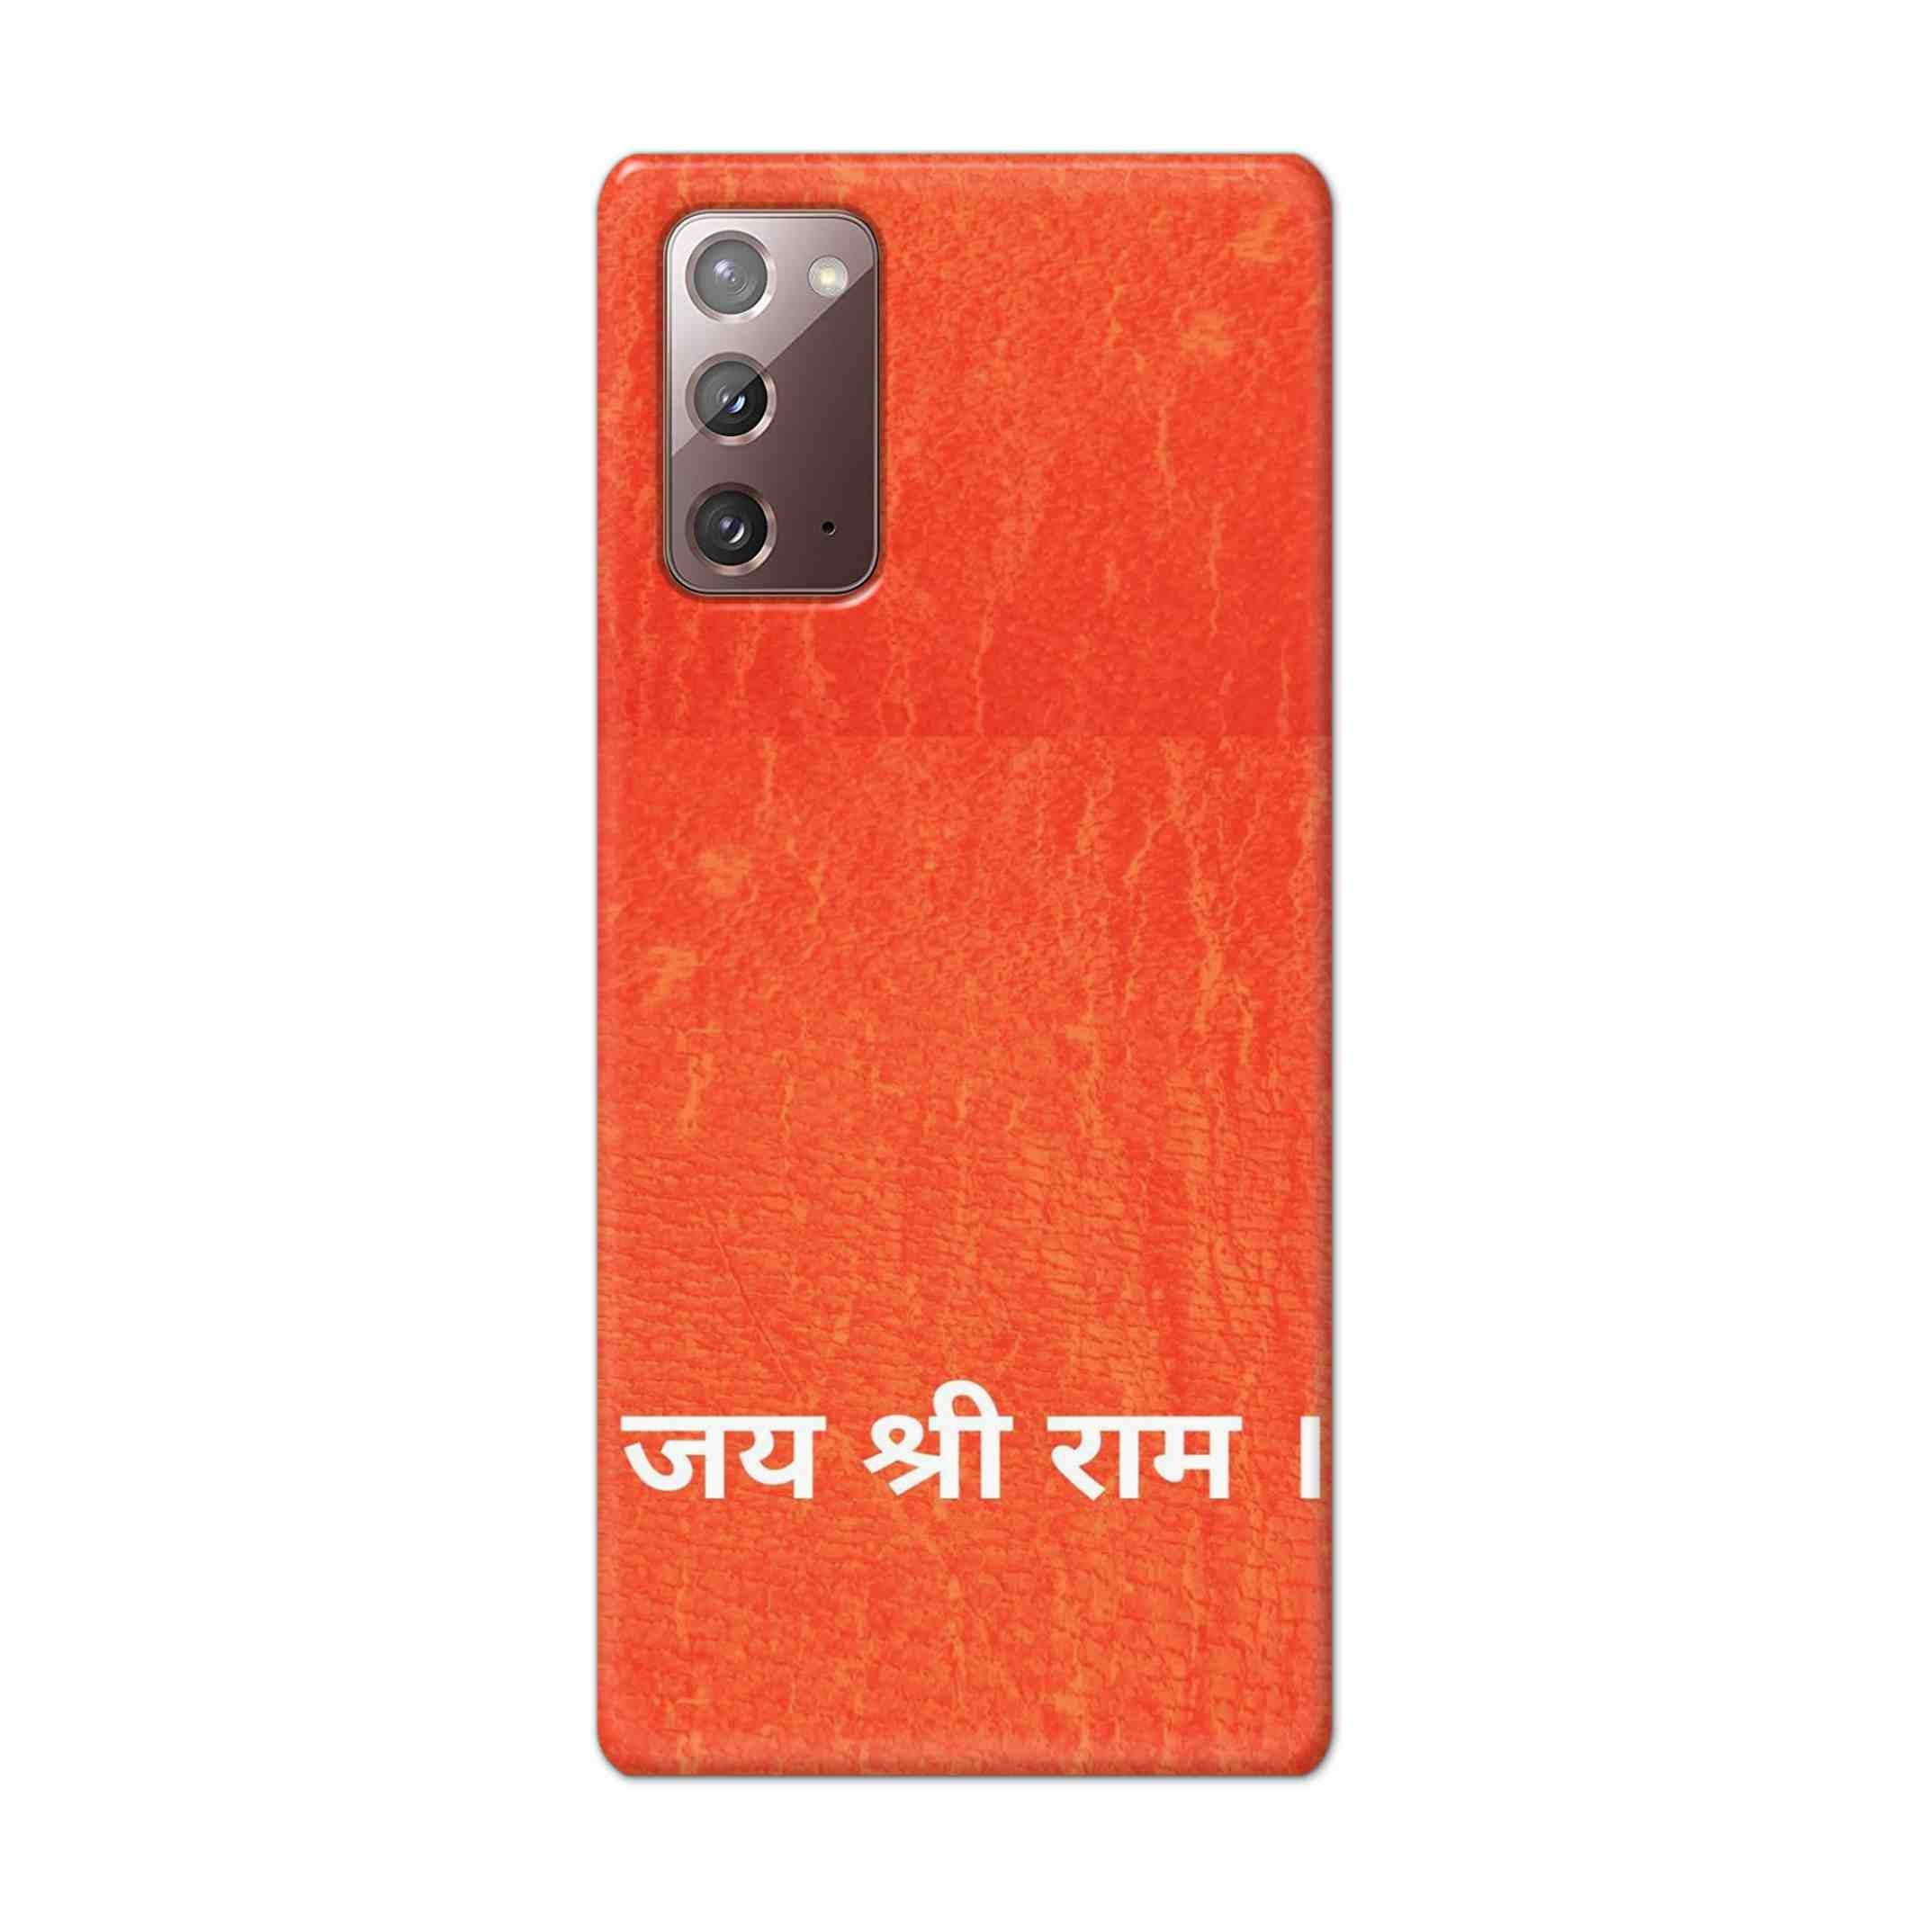 Buy Jai Shree Ram Hard Back Mobile Phone Case Cover For Samsung Galaxy Note 20 Online